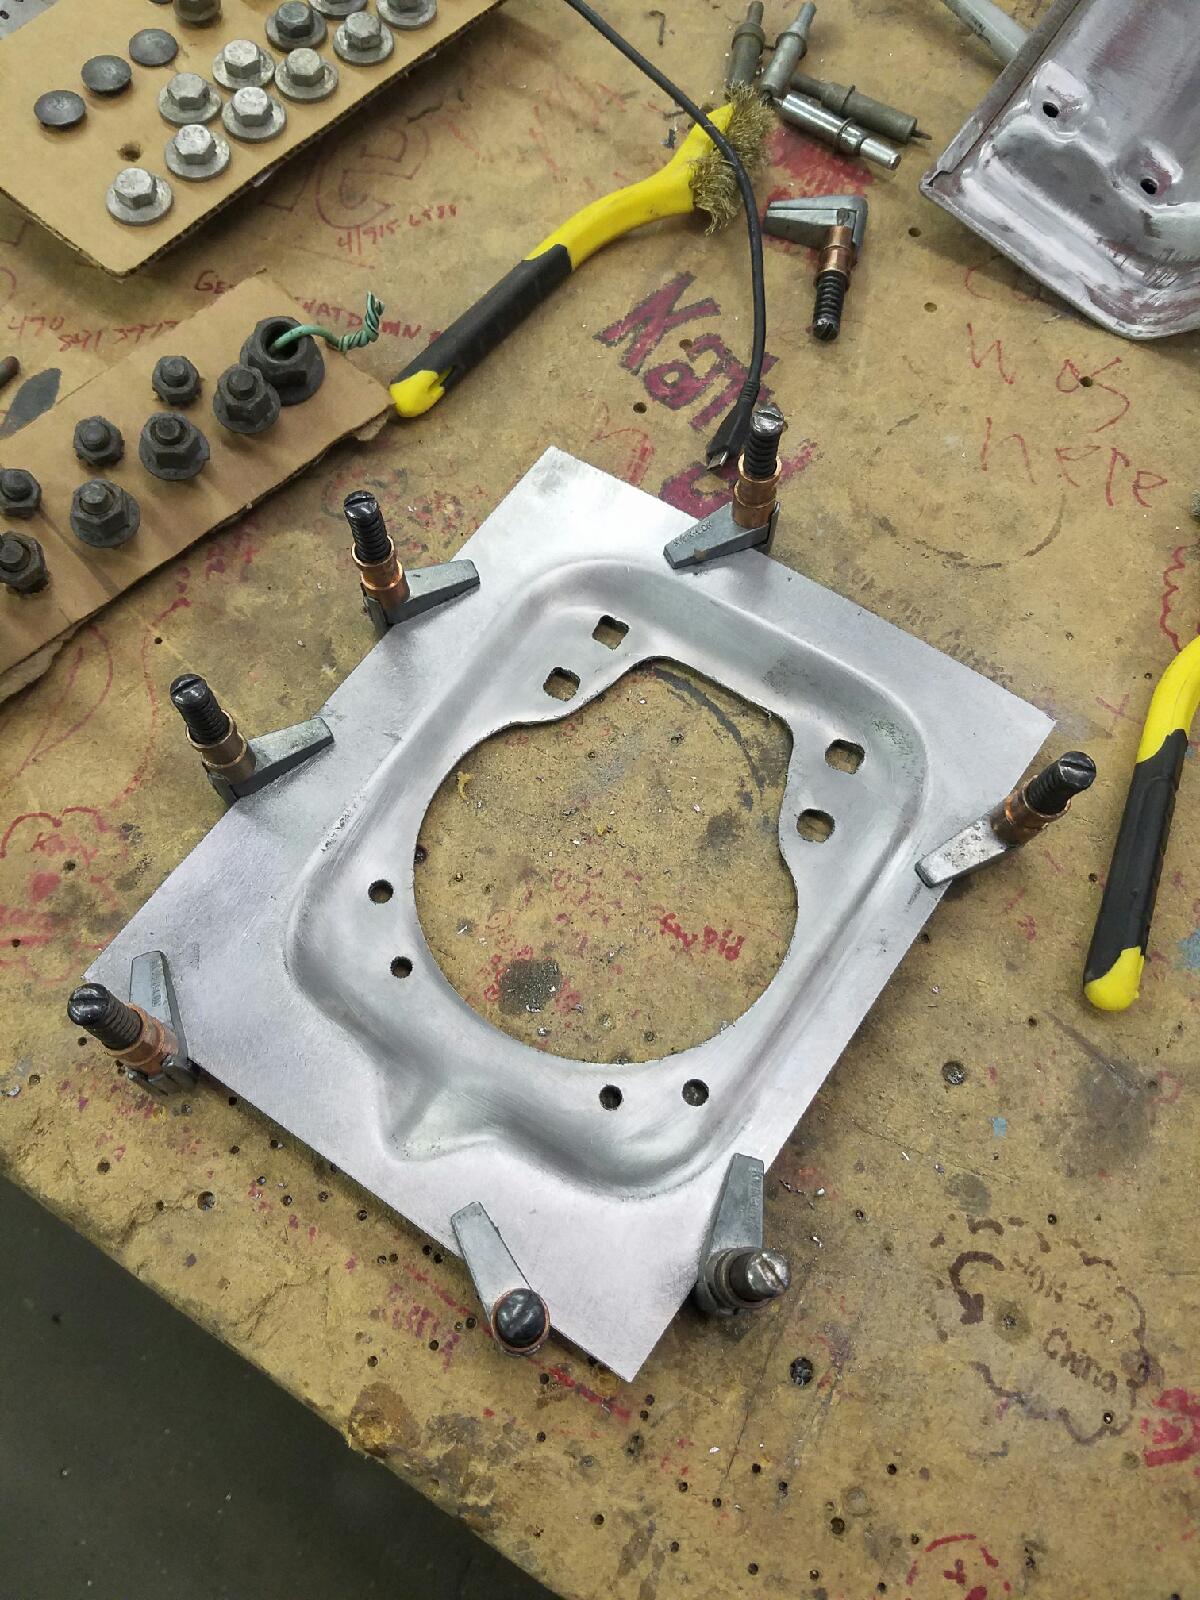 Here is a repair piece for the fuel door on a Cyclone.